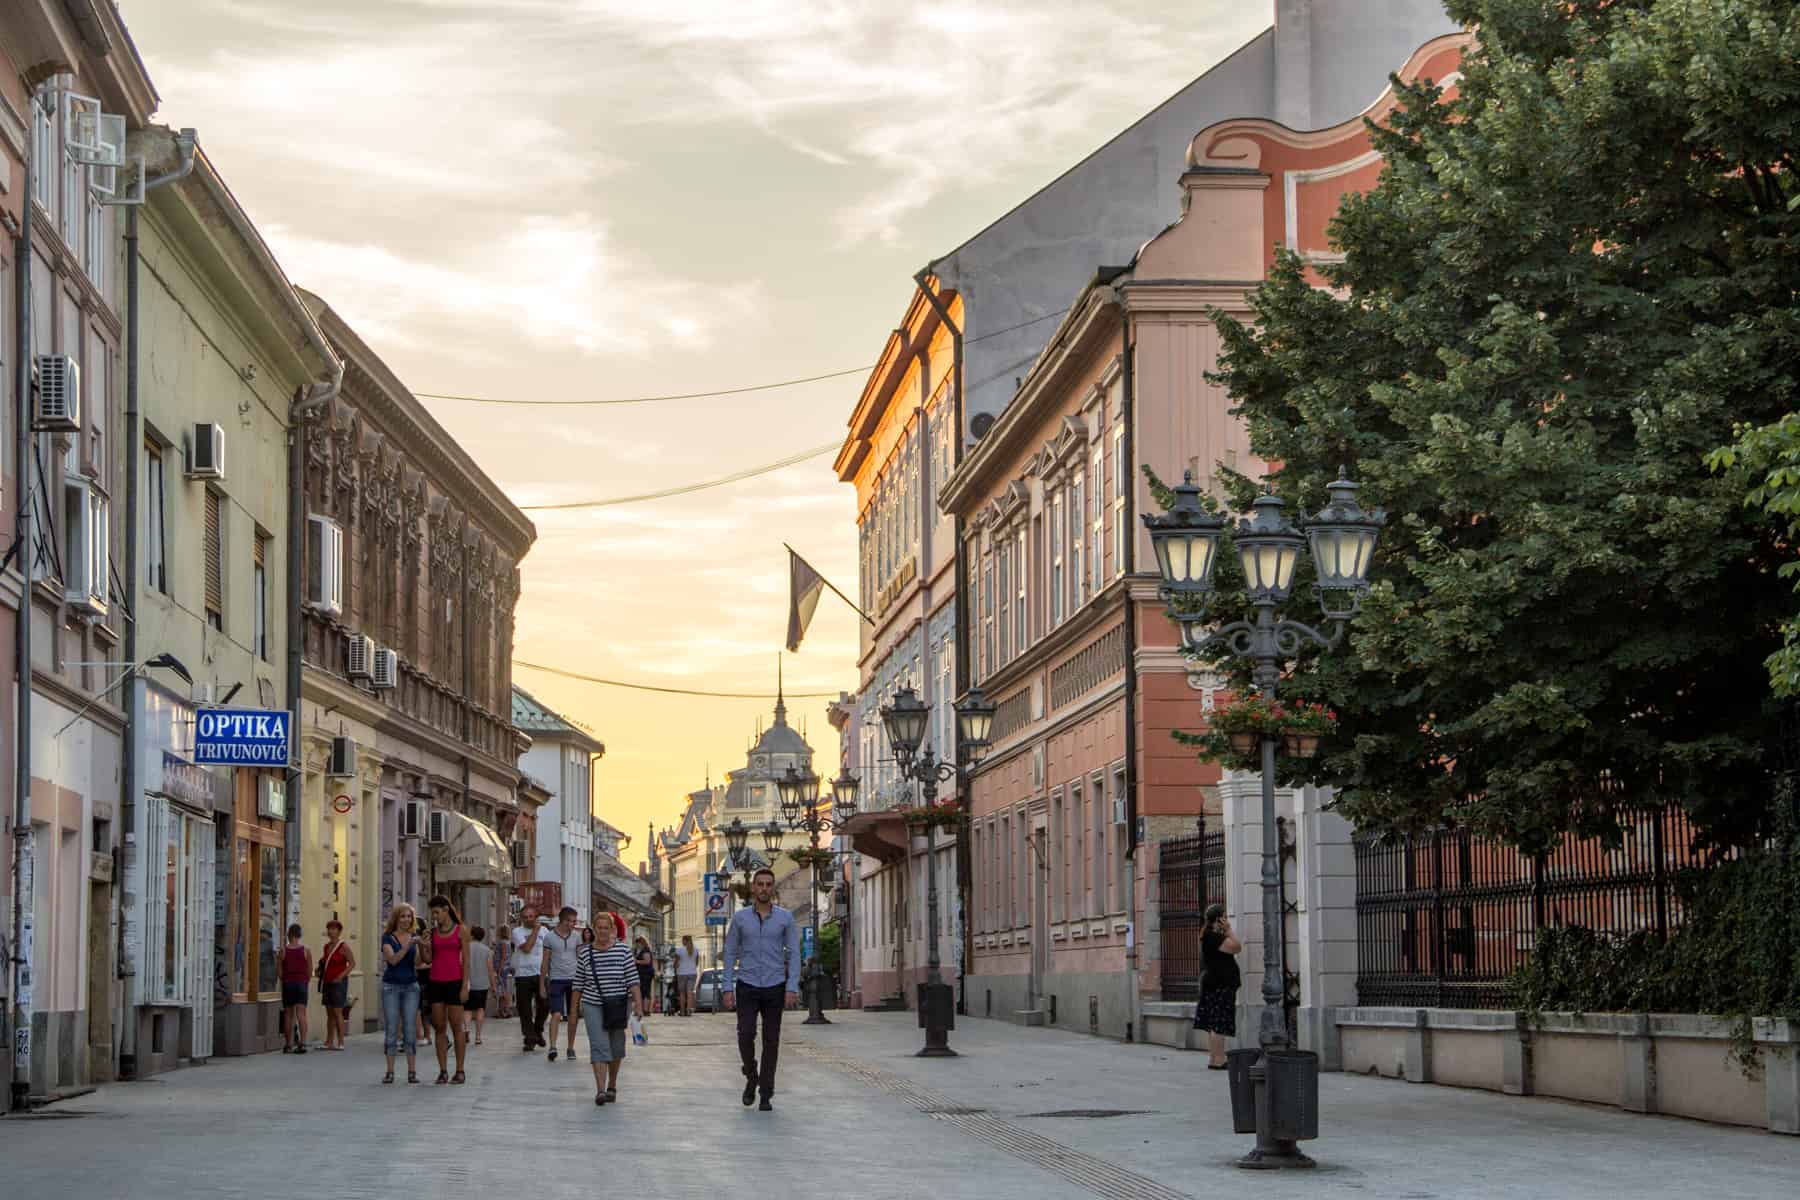 People walking down a pedestrian street in Nove Sad, Serbia, lined with pastel coloured buildings, glowing from the sunset in the background. 